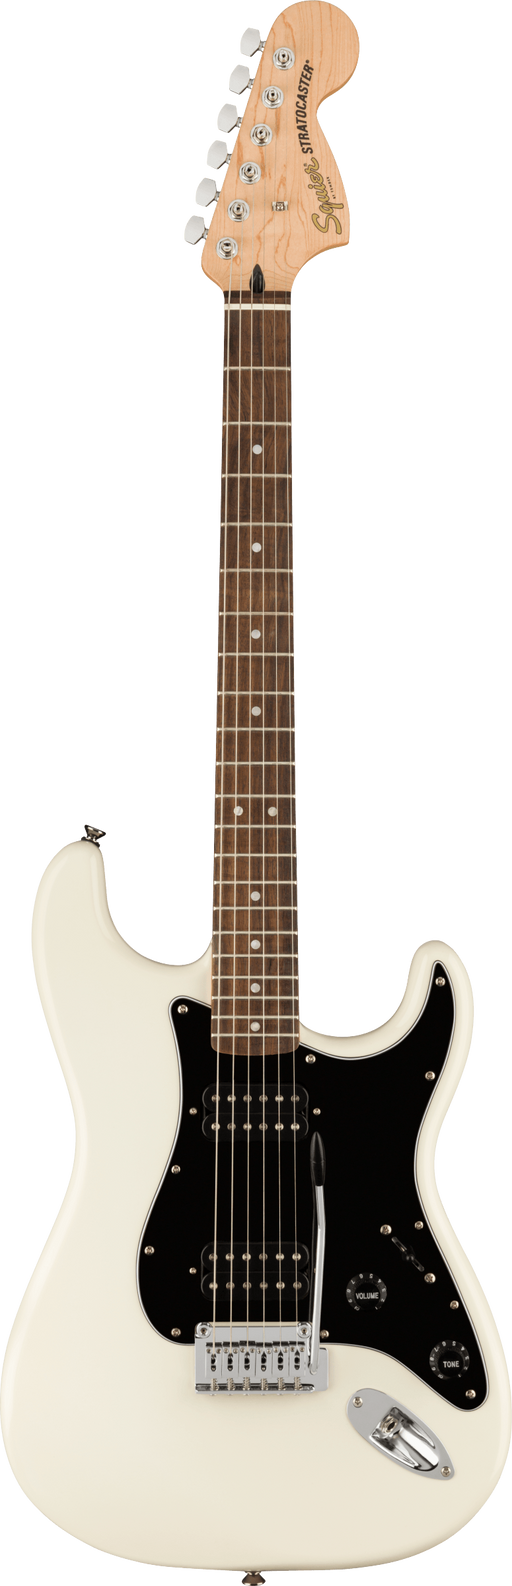 Squier Affinity Stratocaster HH, Laurel Fingerboard, Black Pickguard, Olympic White - Fair Deal Music